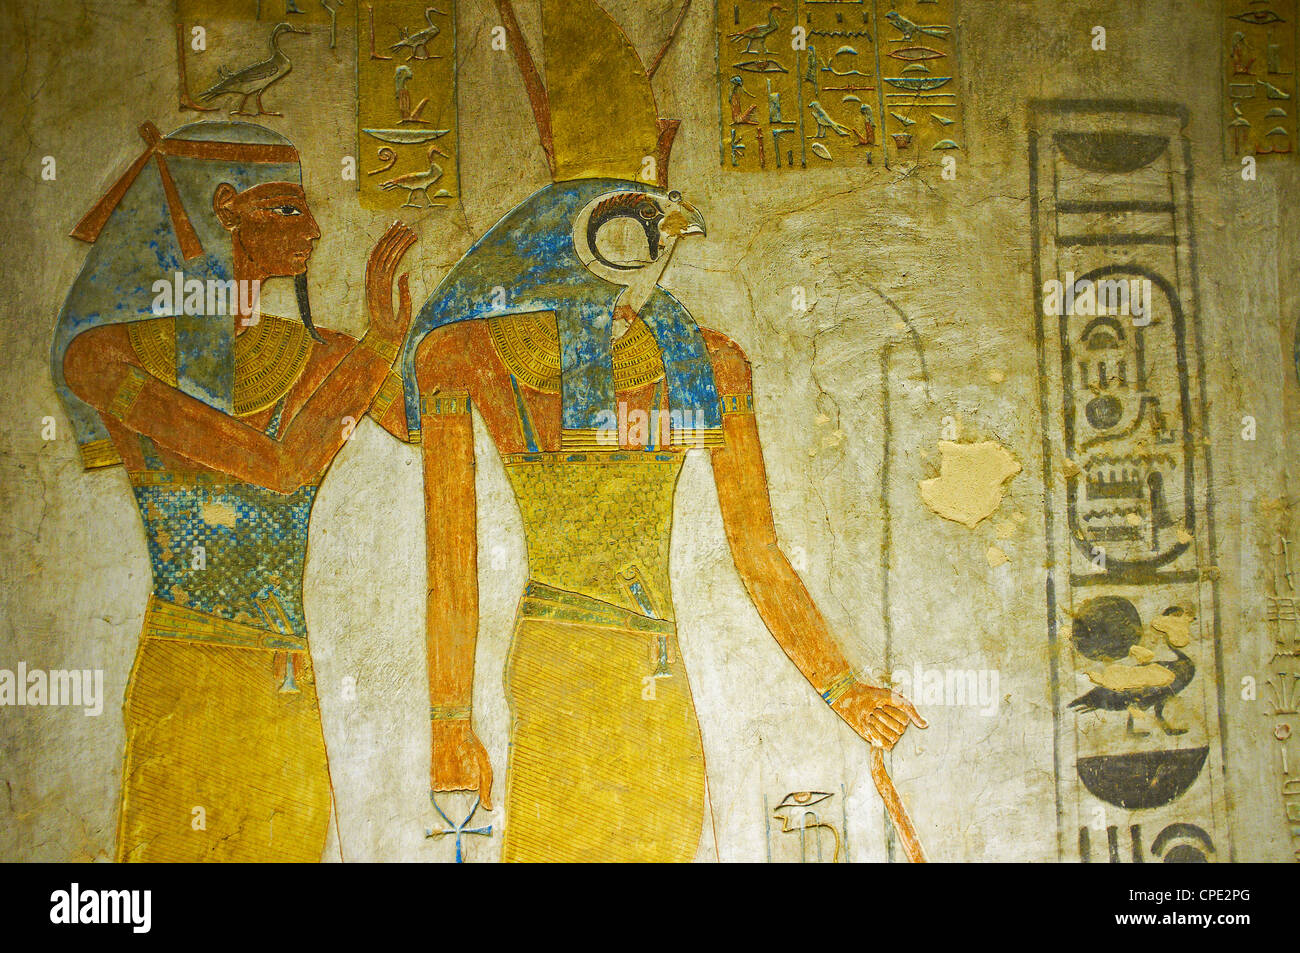 Bas-relief painted on the walls of the royal tomb, Setnakht tomb, Valley of the Kings, Thebes, Egypt, Africa Stock Photo